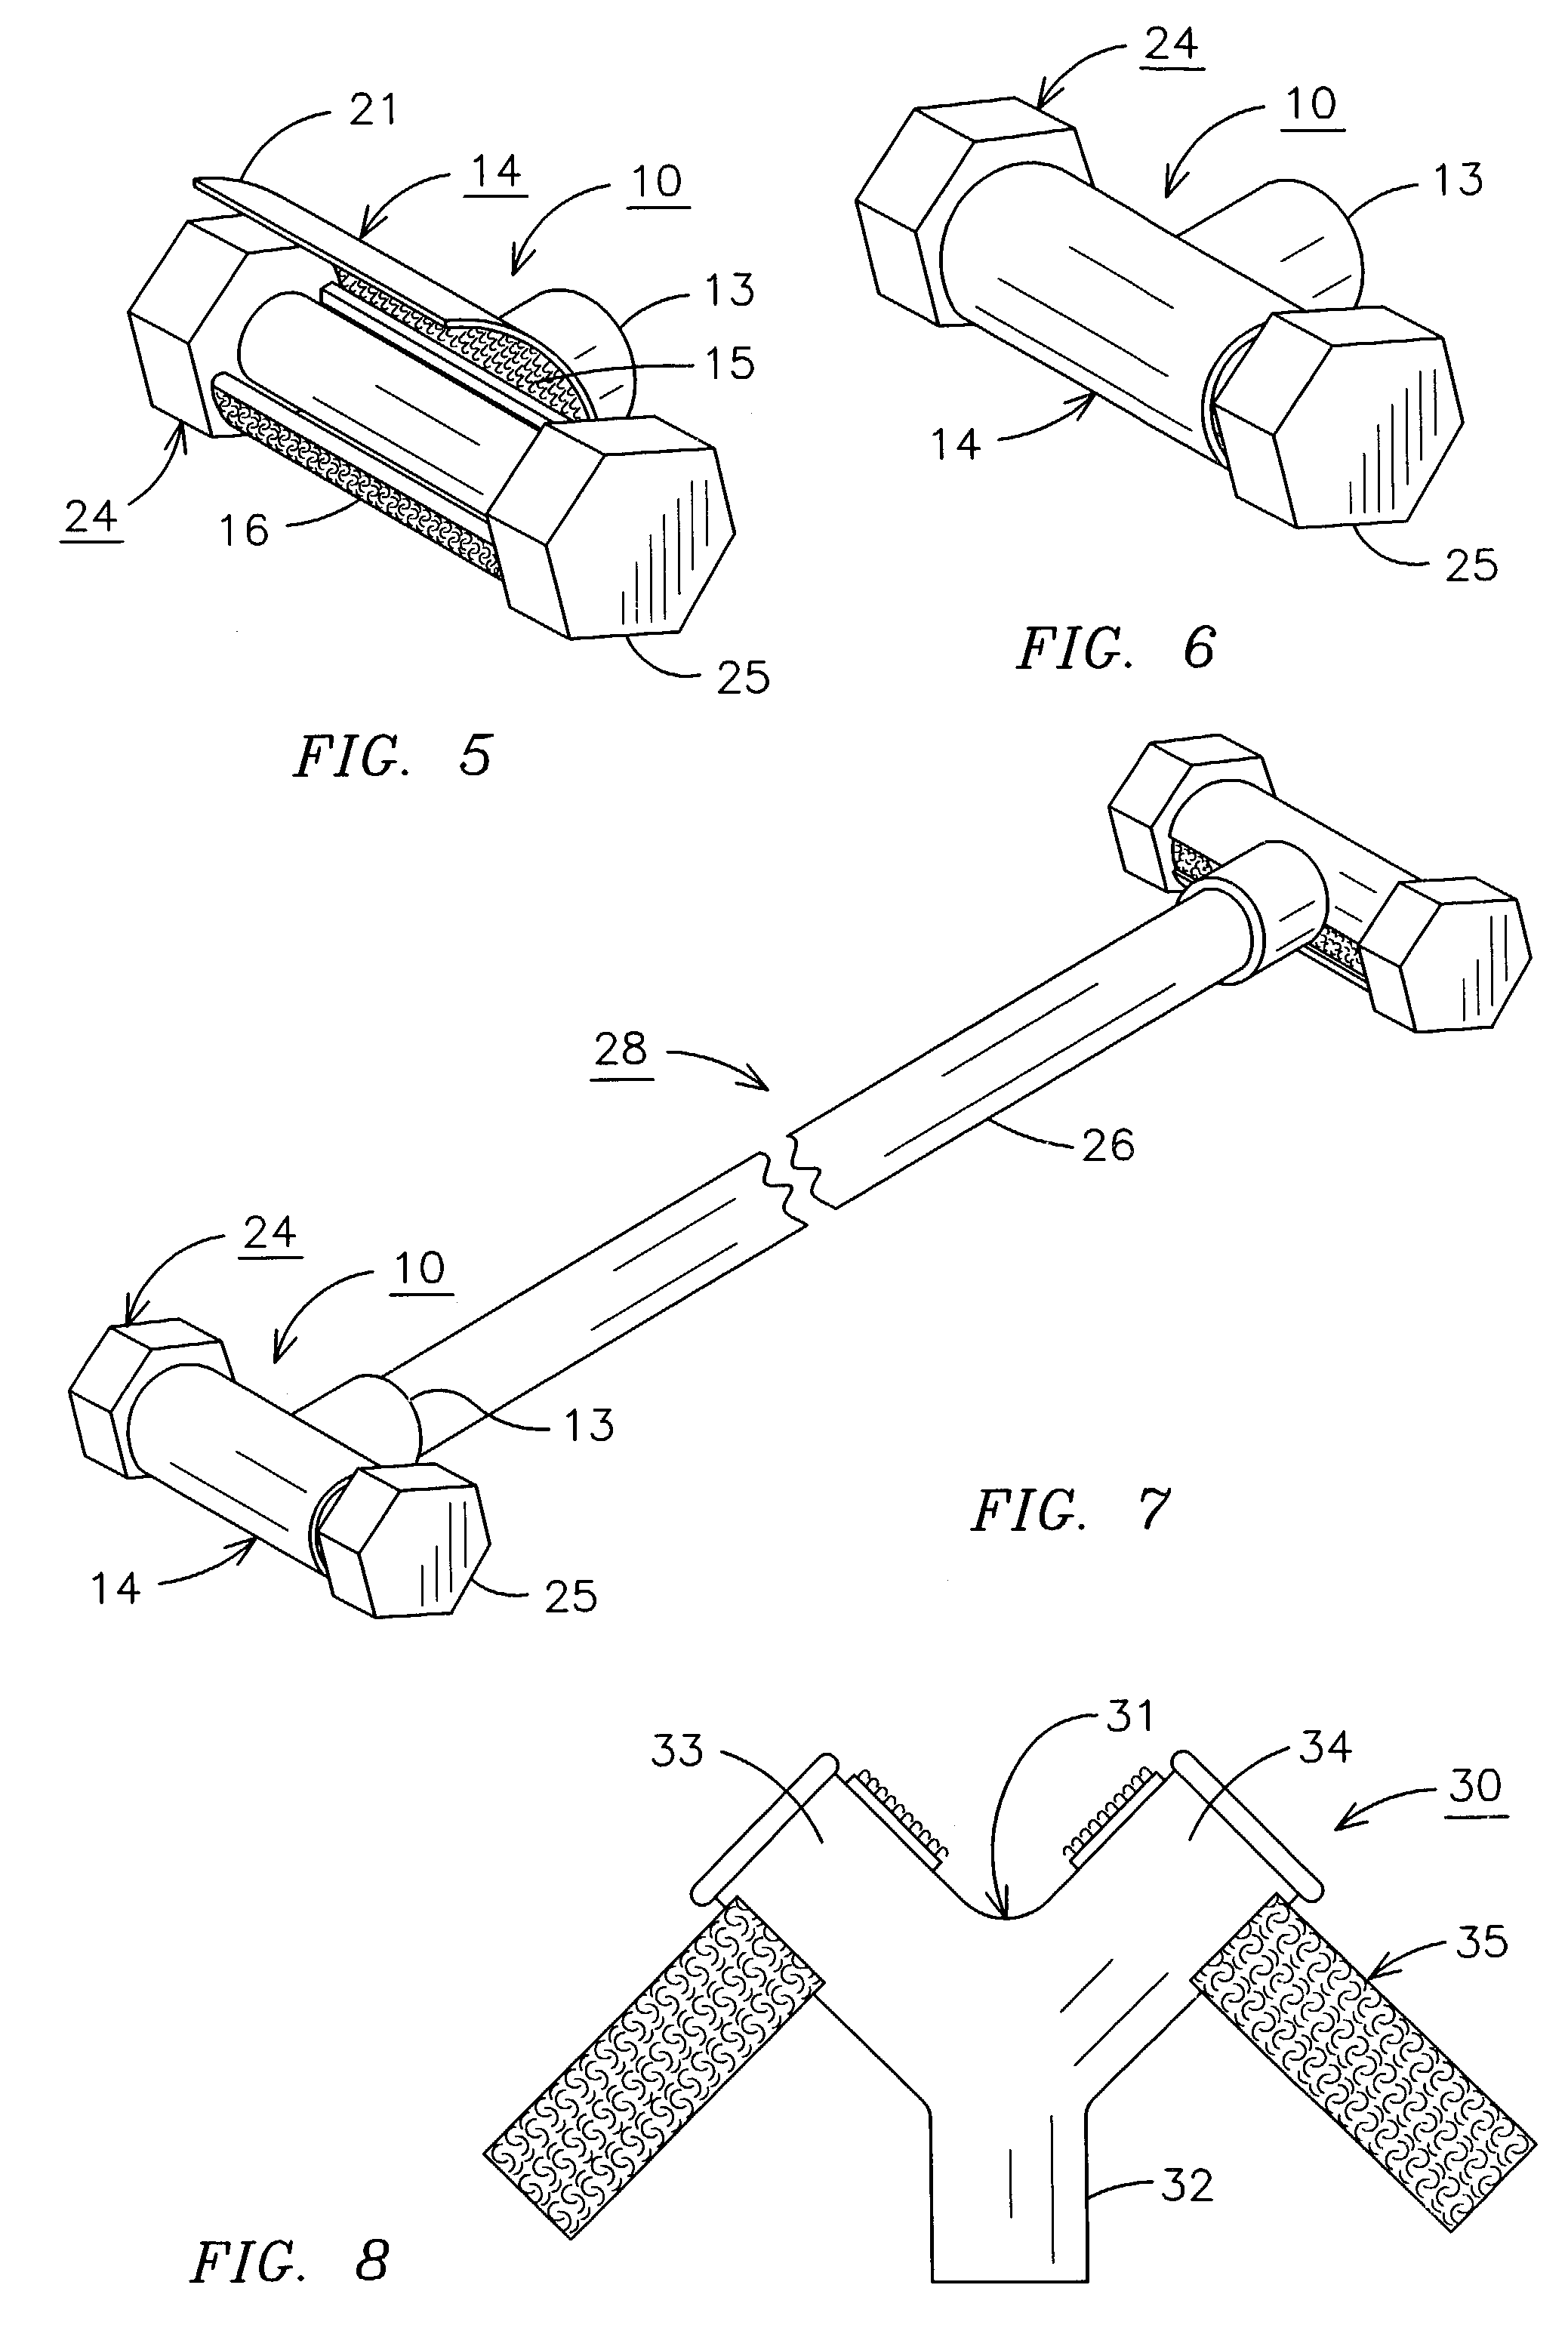 Bar clamp connection